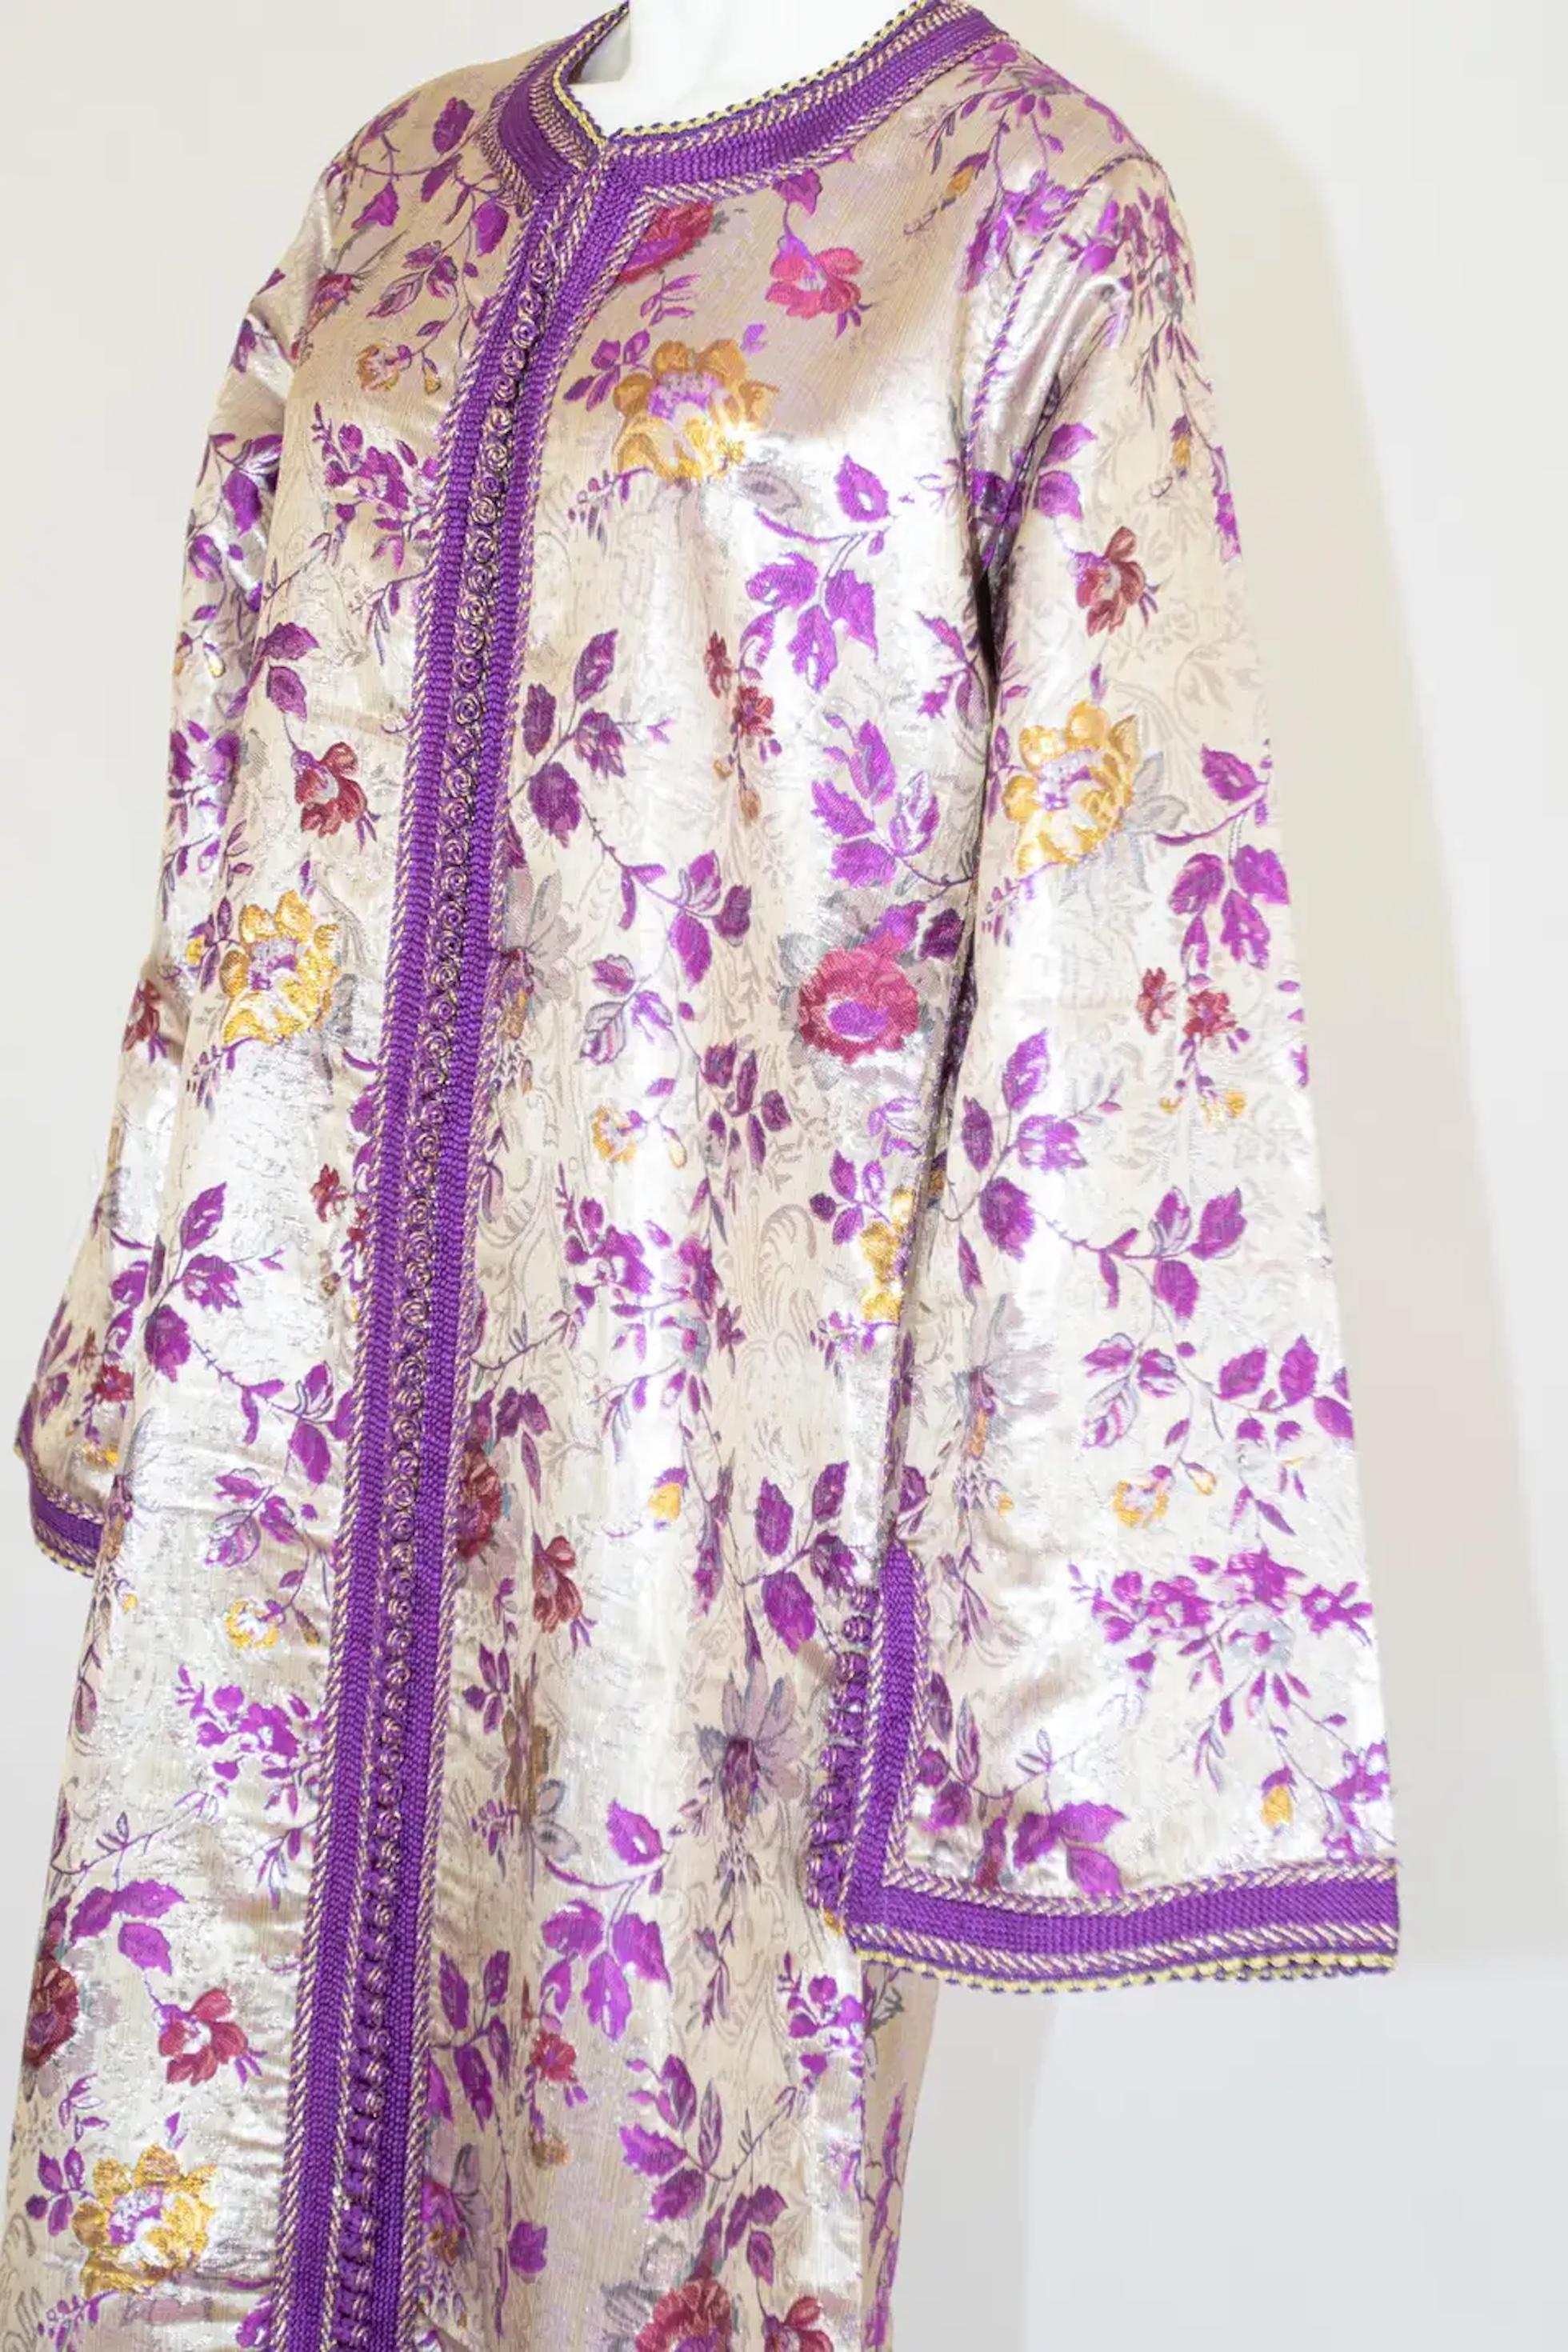 Women's Moroccan Caftan Purple and Silver Damask Embroidered, Vintage, 1960s